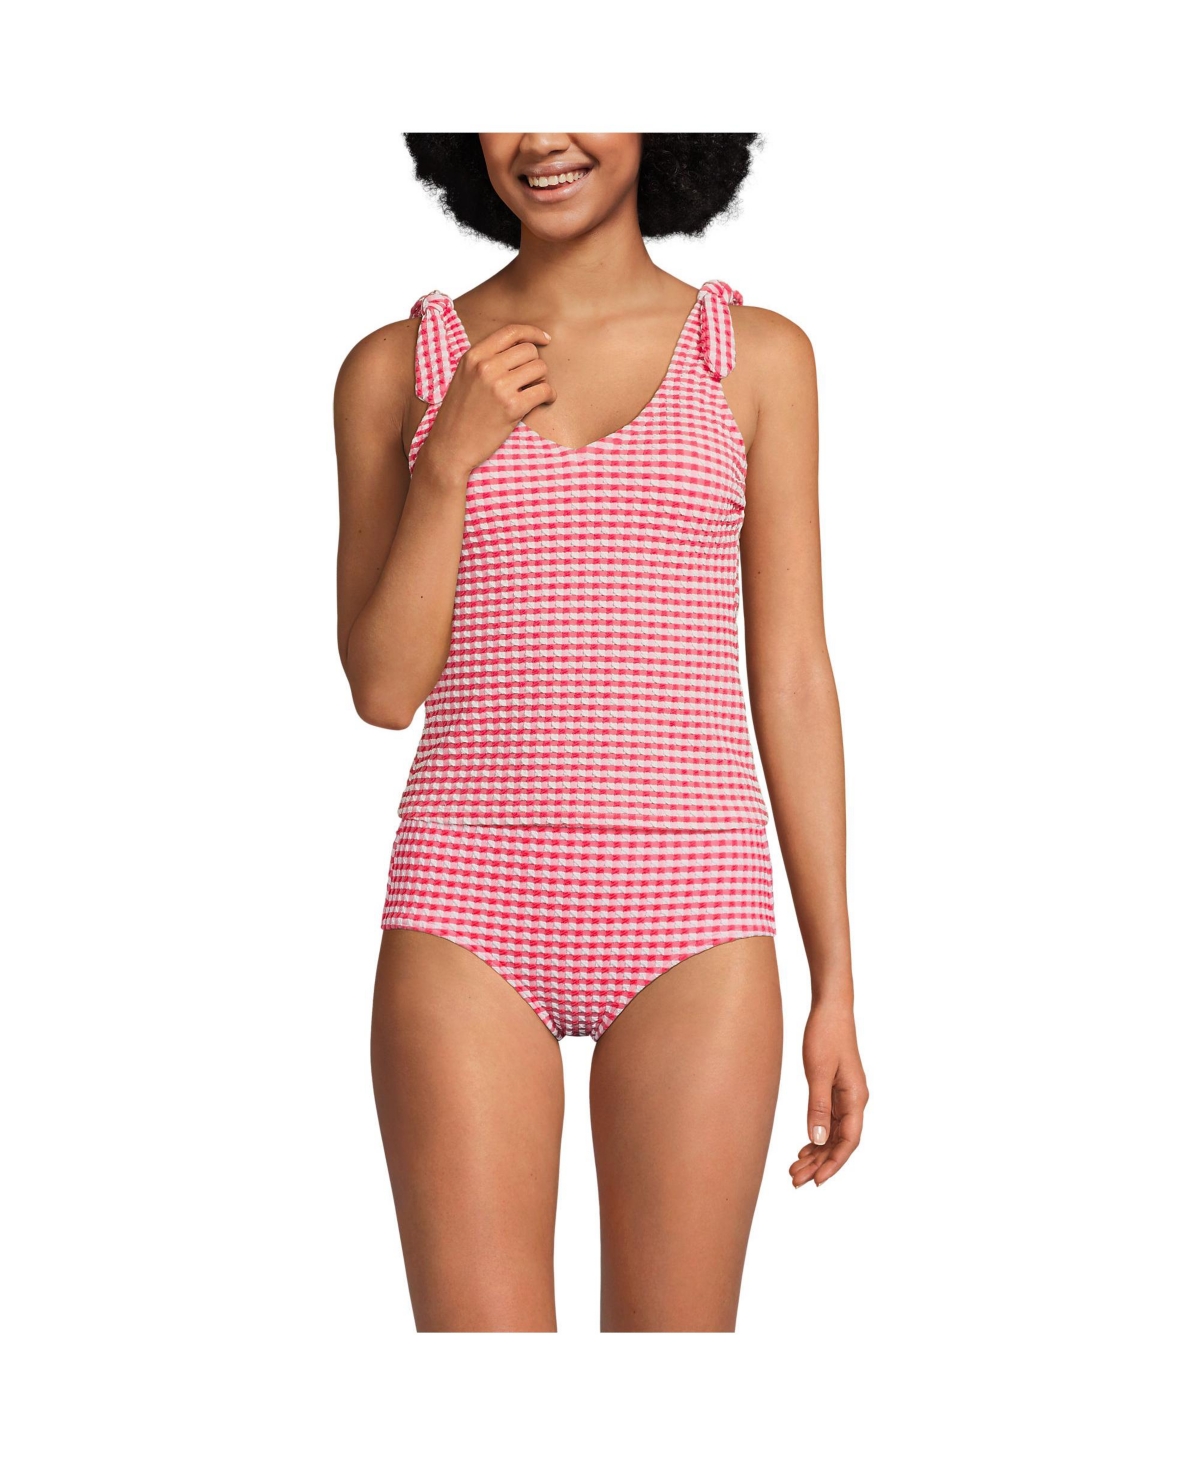 Women's Gingham V-Neck Shoulder Tie Tankini Swimsuit Top - Rouge pink/white gingham